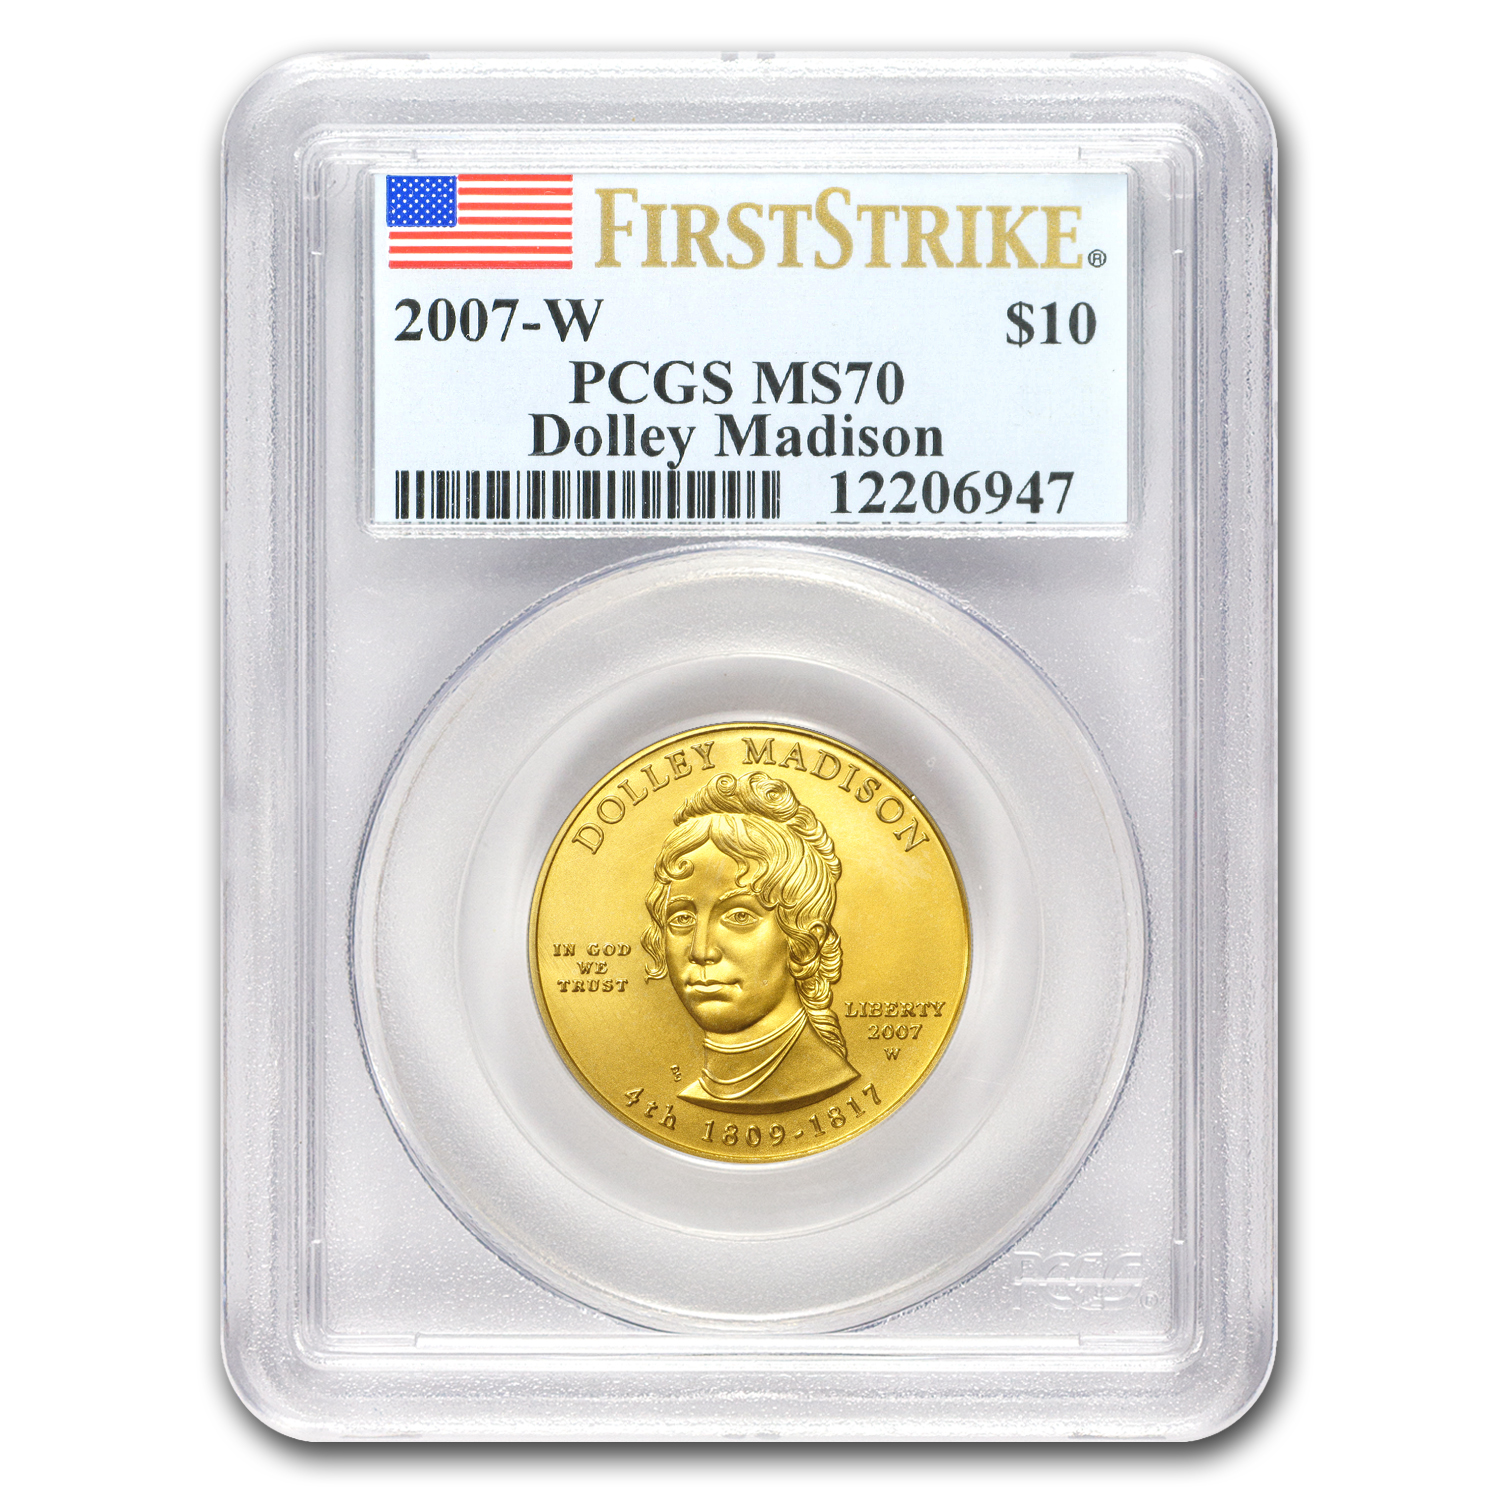 Buy 2007-W 1/2 oz Gold Dolley Madison MS-70 PCGS (FirstStrike?)